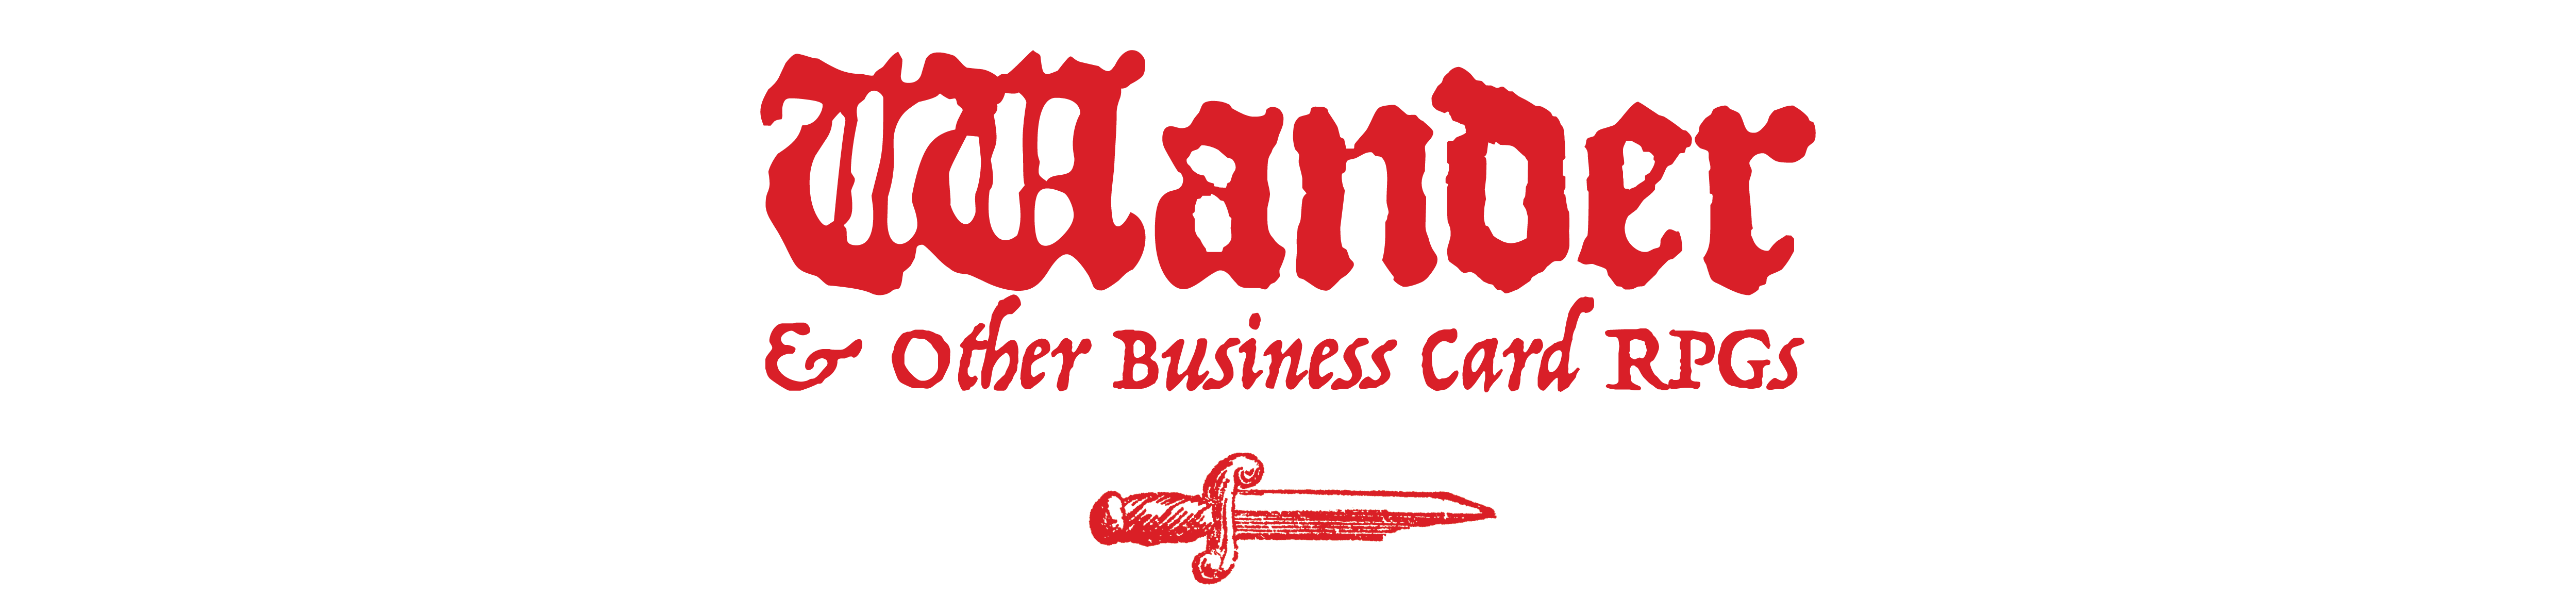 Wander and other business card RPGs